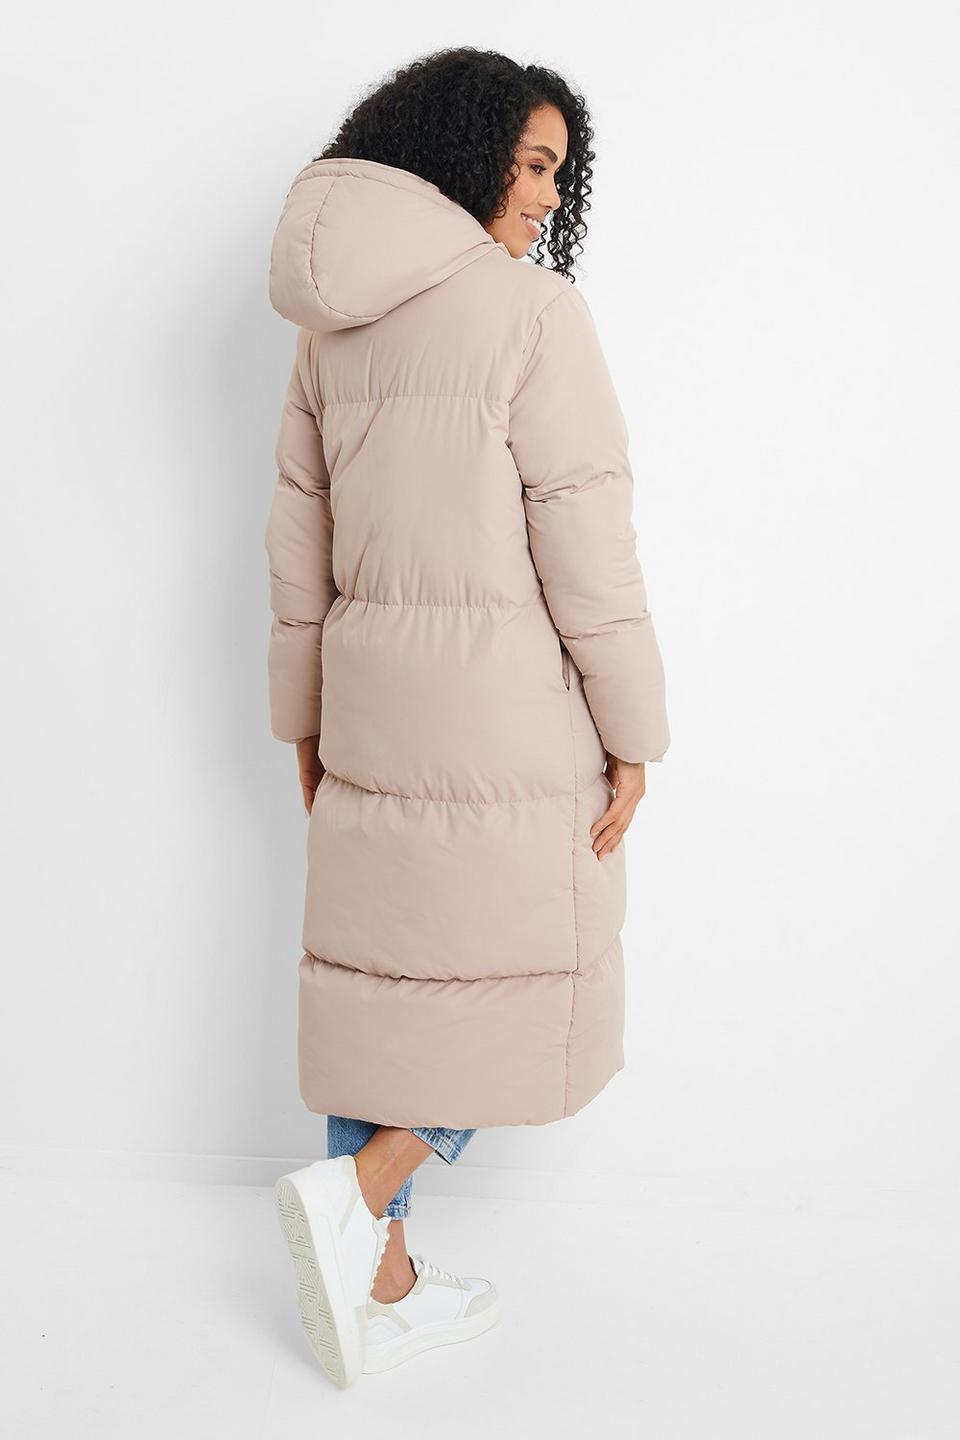 Jackets & Coats | 'Jodie' Quilted Puffer Maxi Jacket | Threadbare